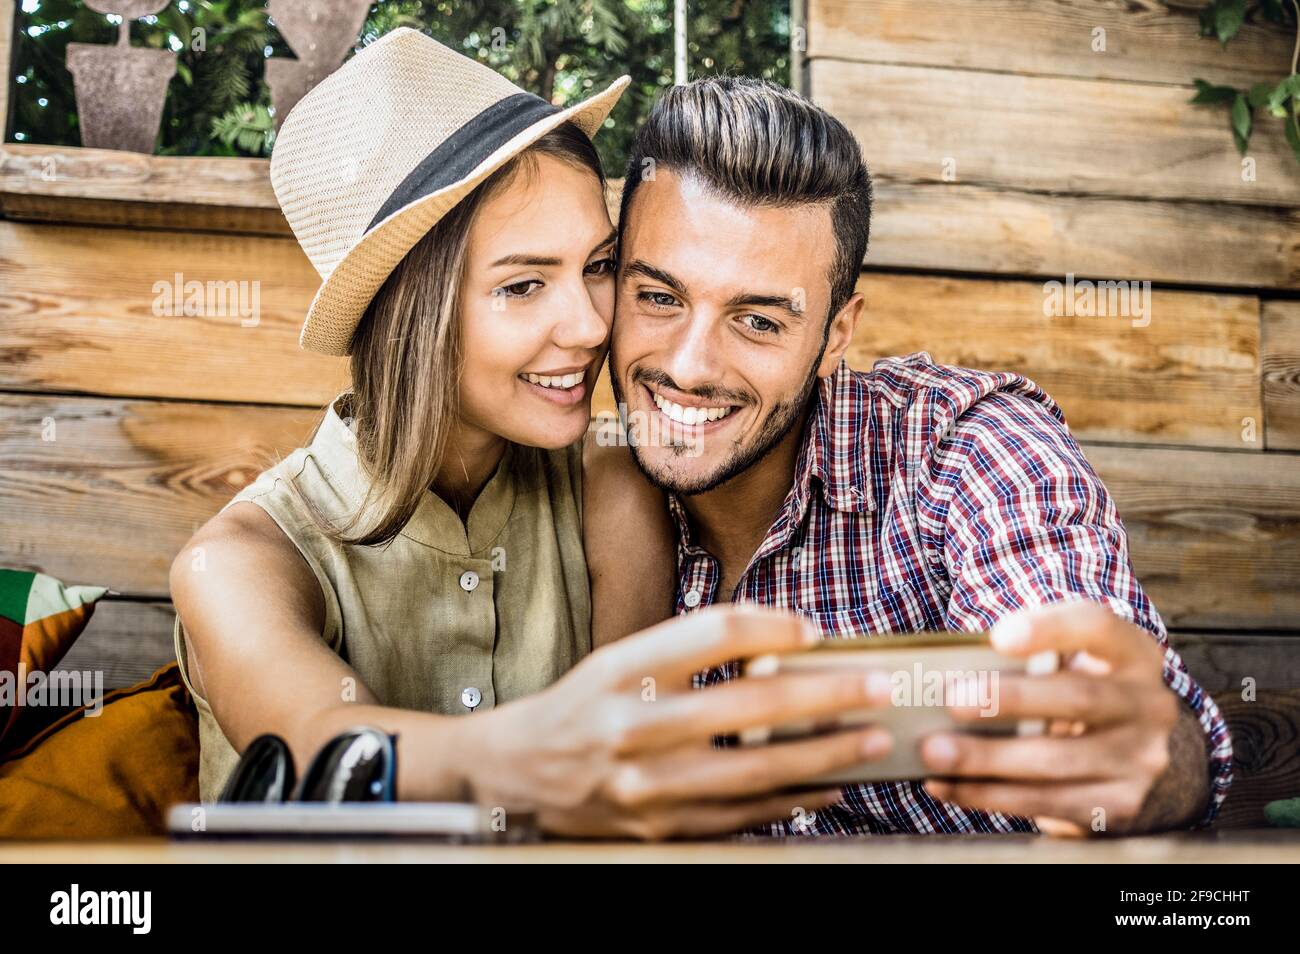 Young fashion lover couple at beginning of love story - Handsome man taking selfie with pretty woman at fashion coffee bar - Relationship concept Stock Photo